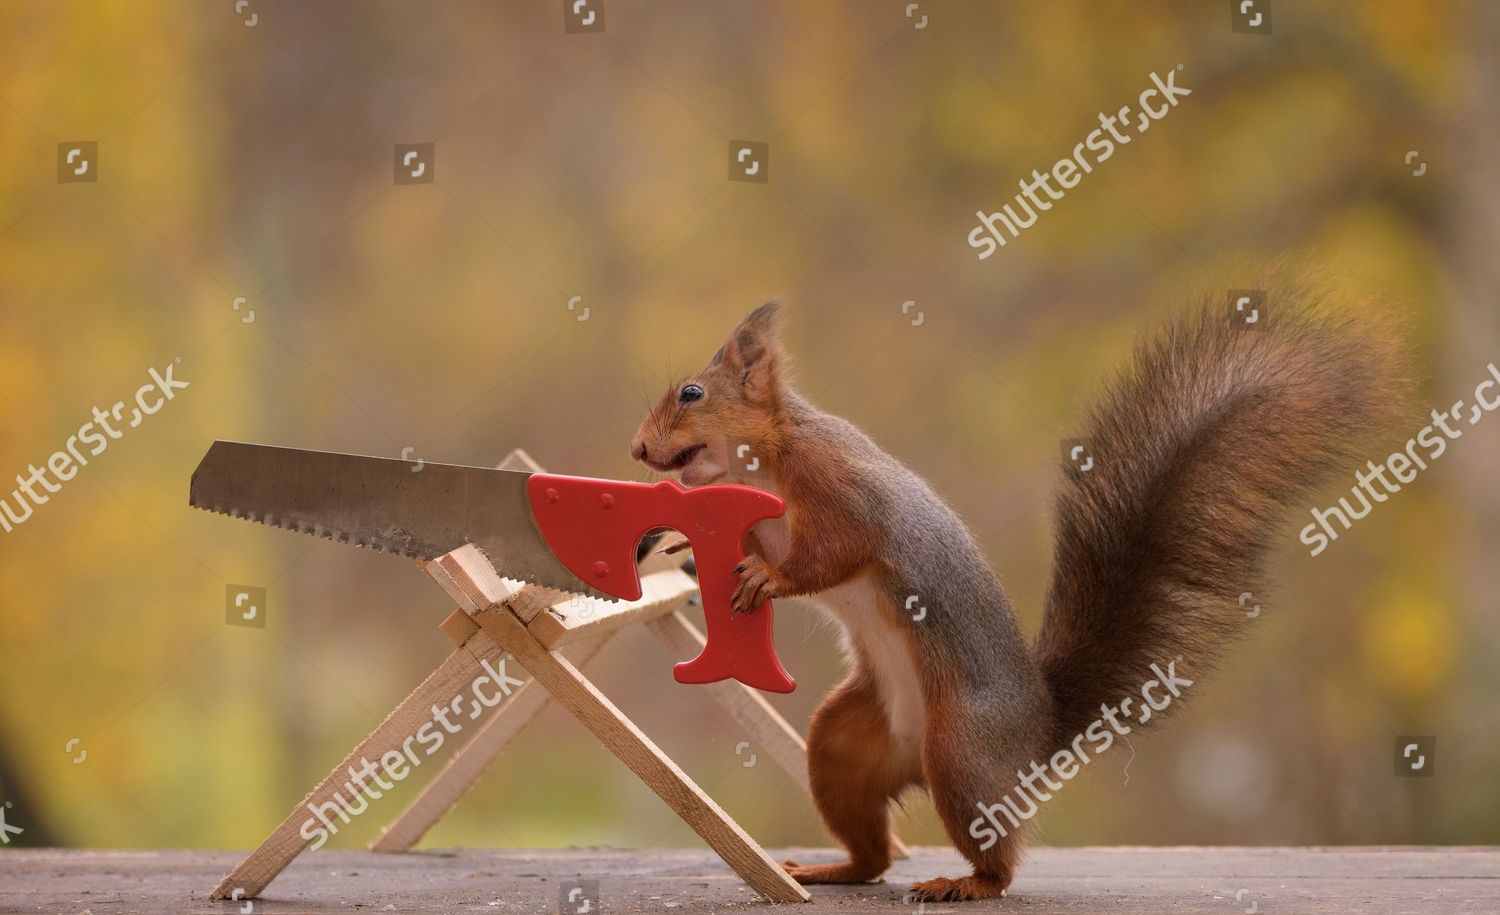 squirrels with chainsaws